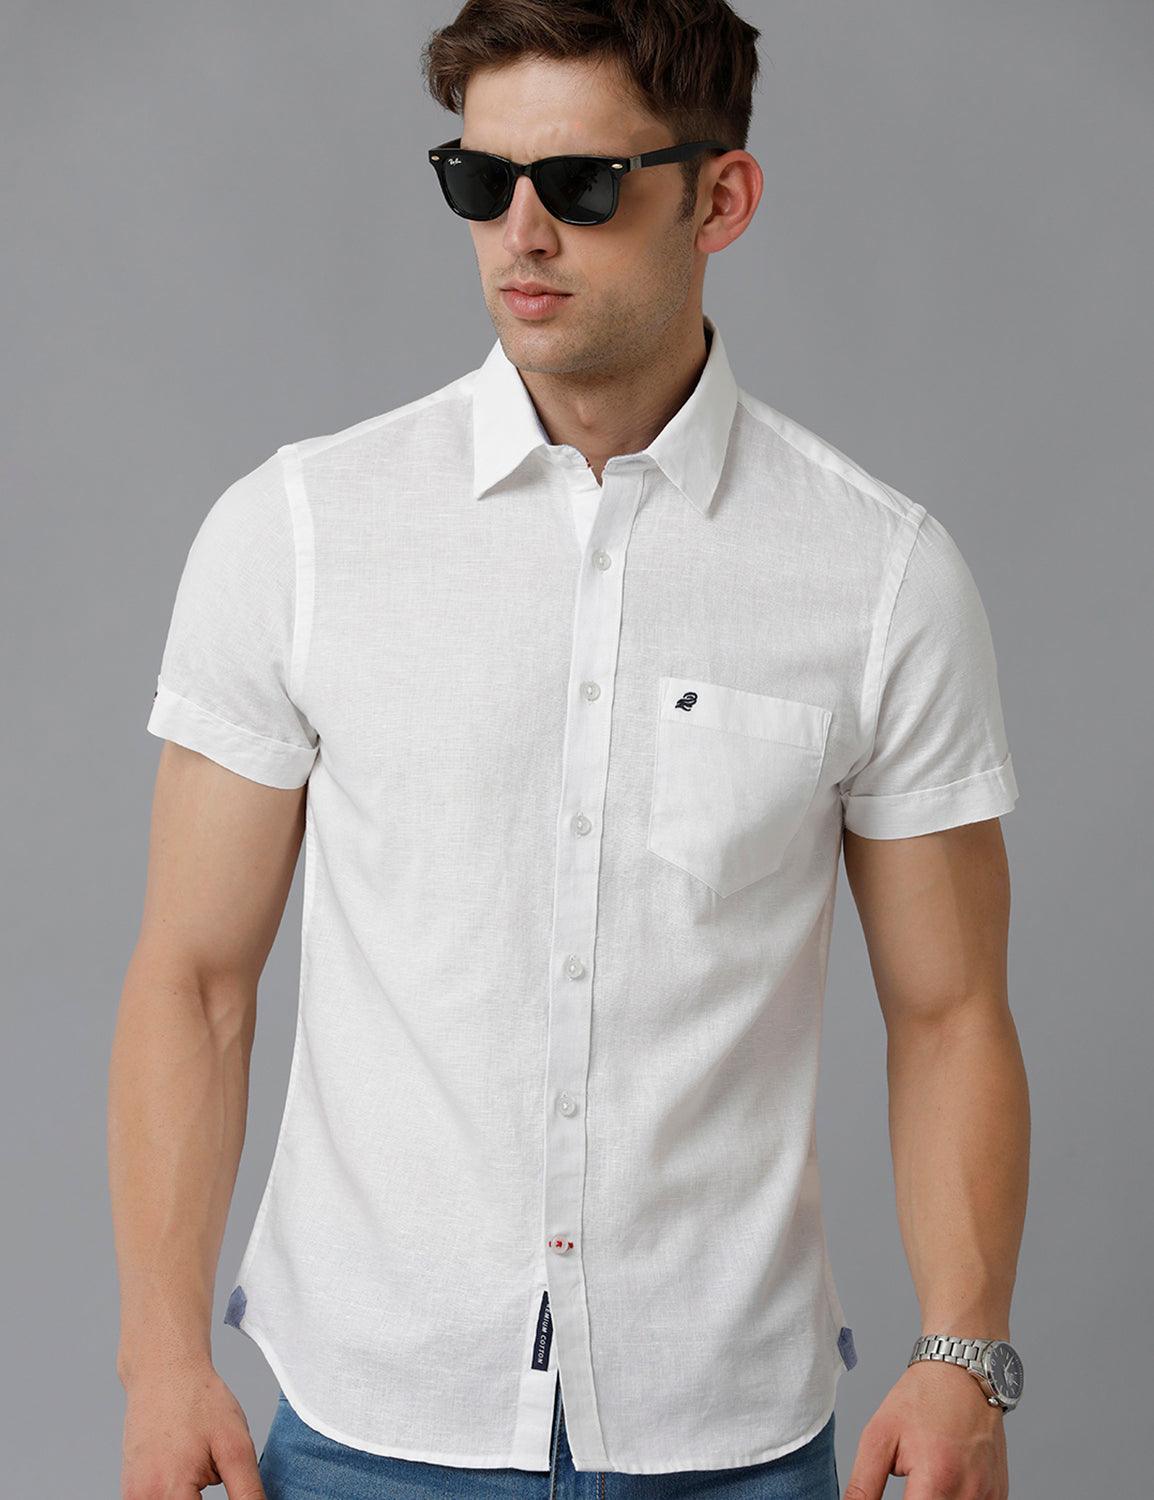 Solid White Cotton Lenin Slim Fit Casual Shirt - Double Two